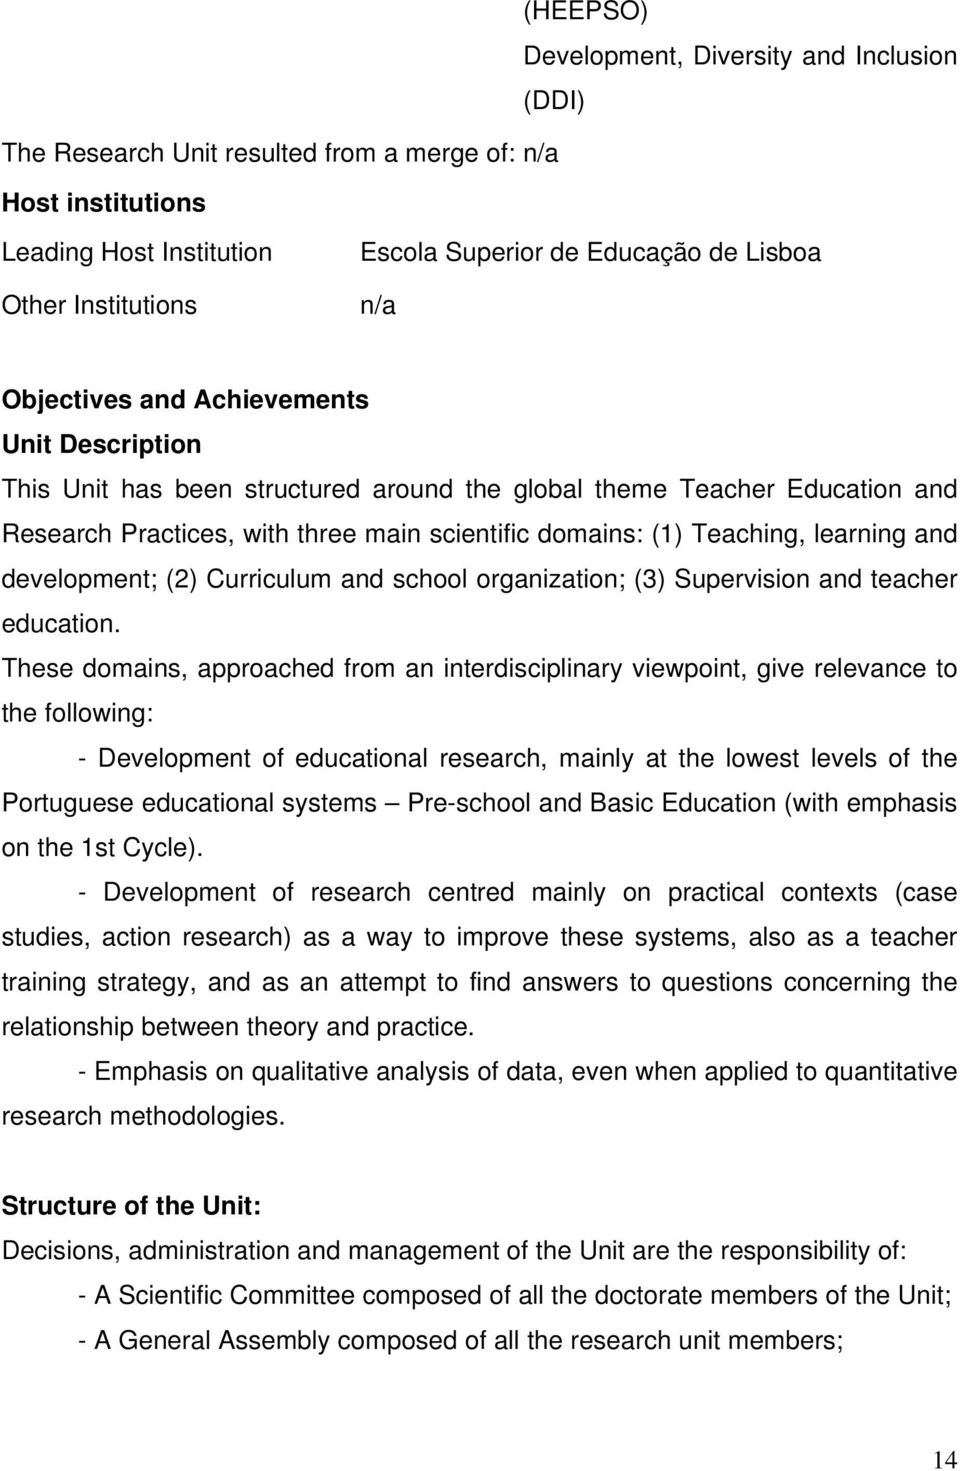 learning and development; (2) Curriculum and school organization; (3) Supervision and teacher education.